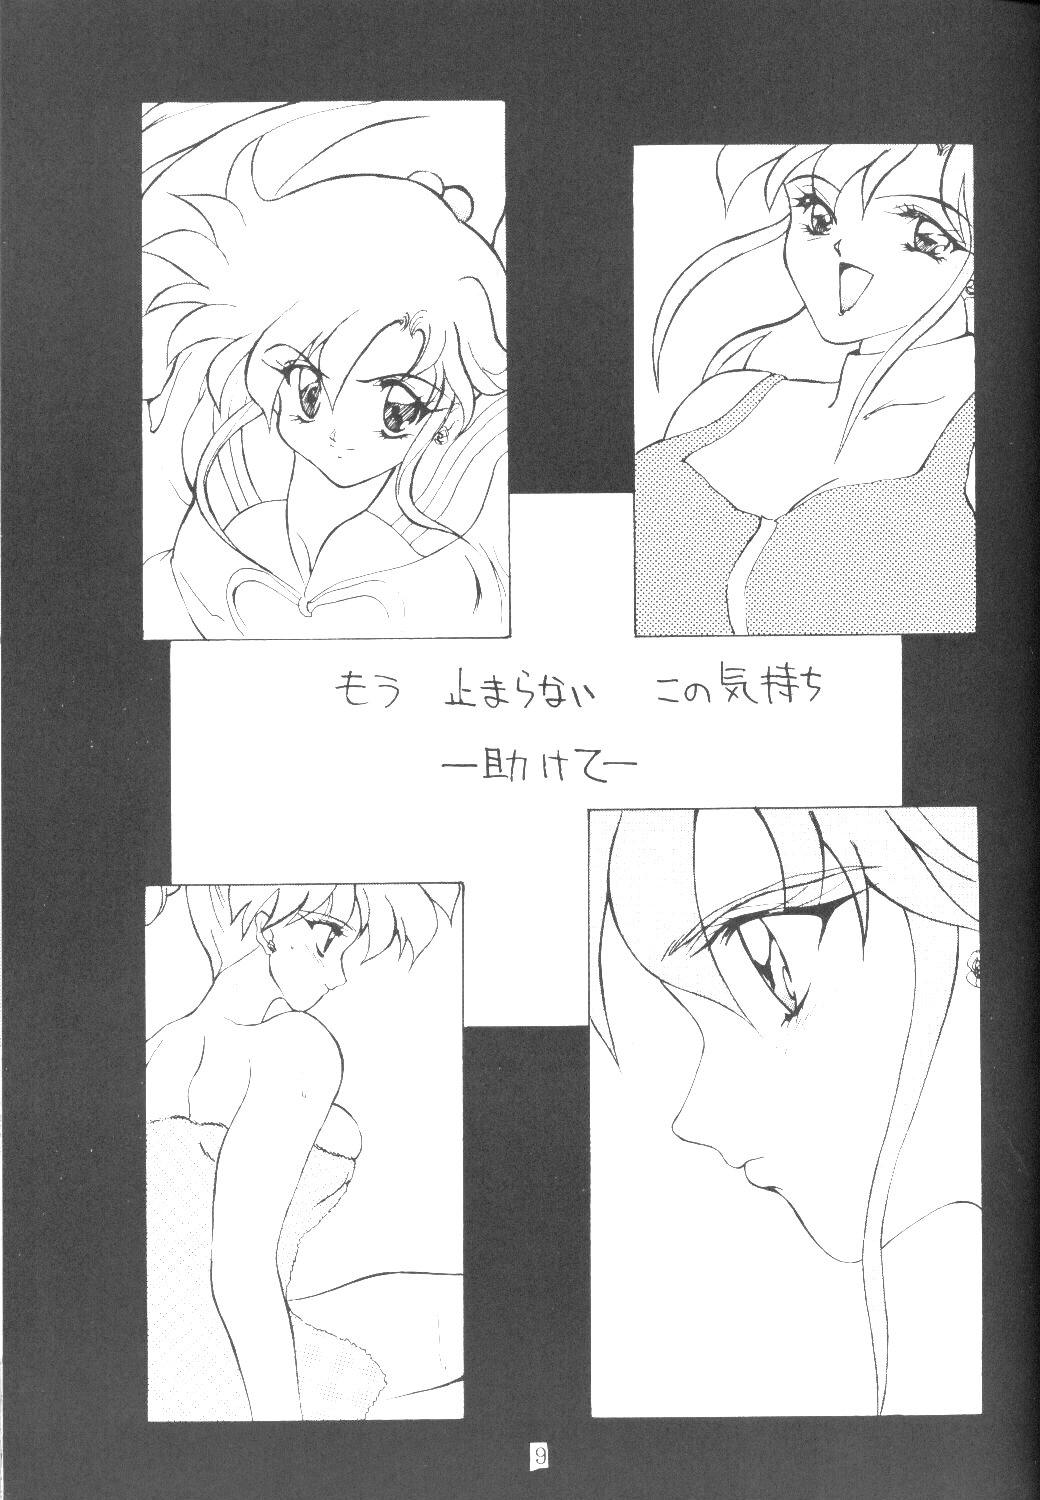 For ALIVE AMI LOST - Sailor moon Nude - Page 8